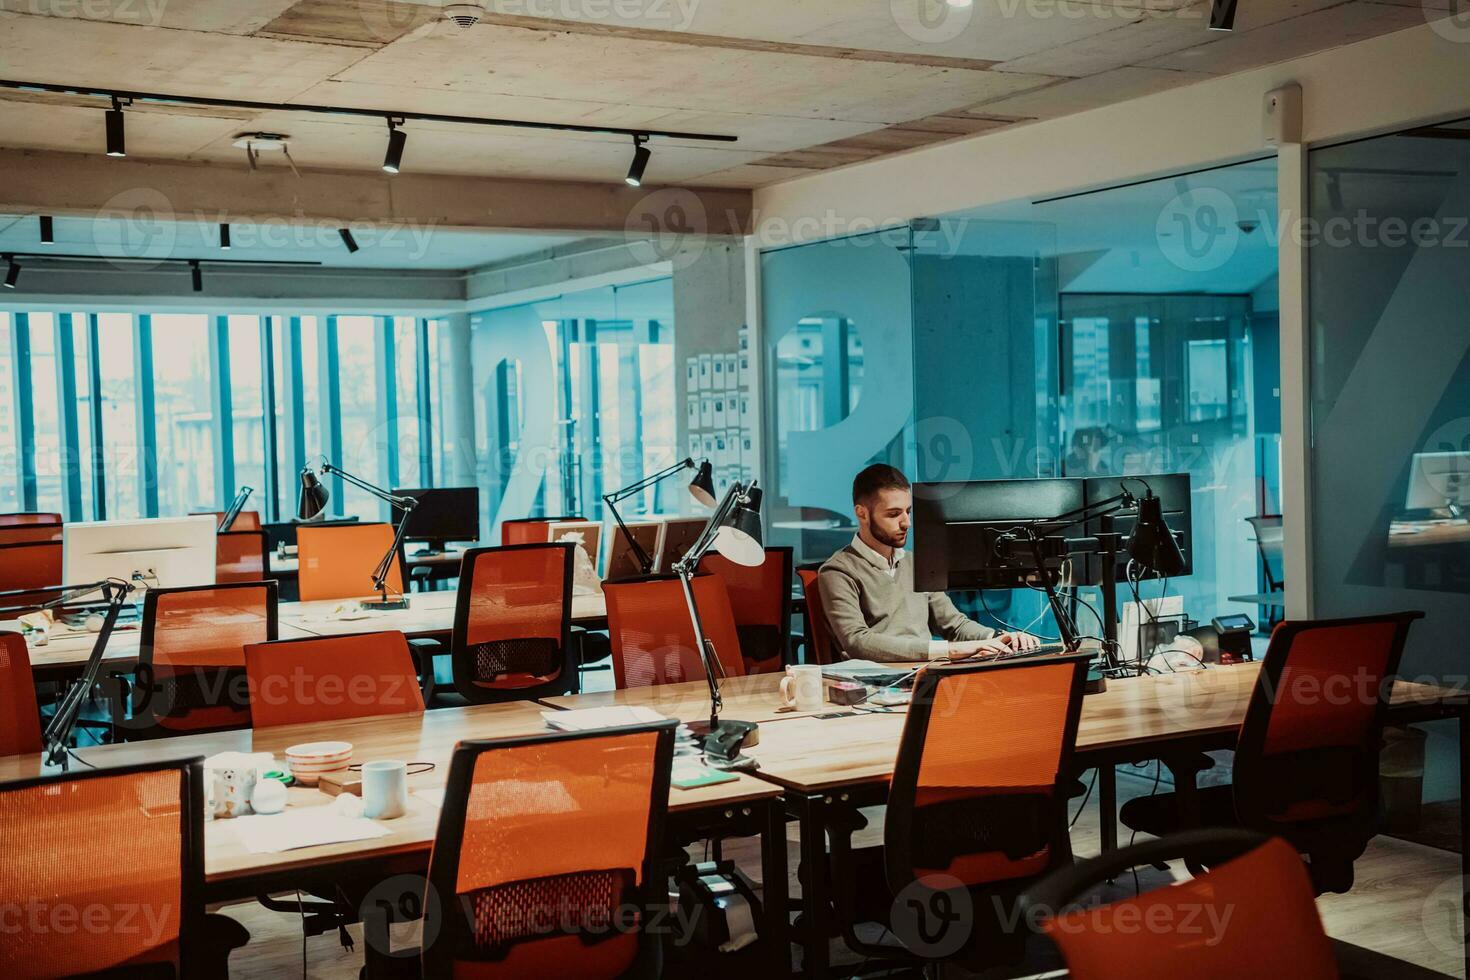 People working in the office photo